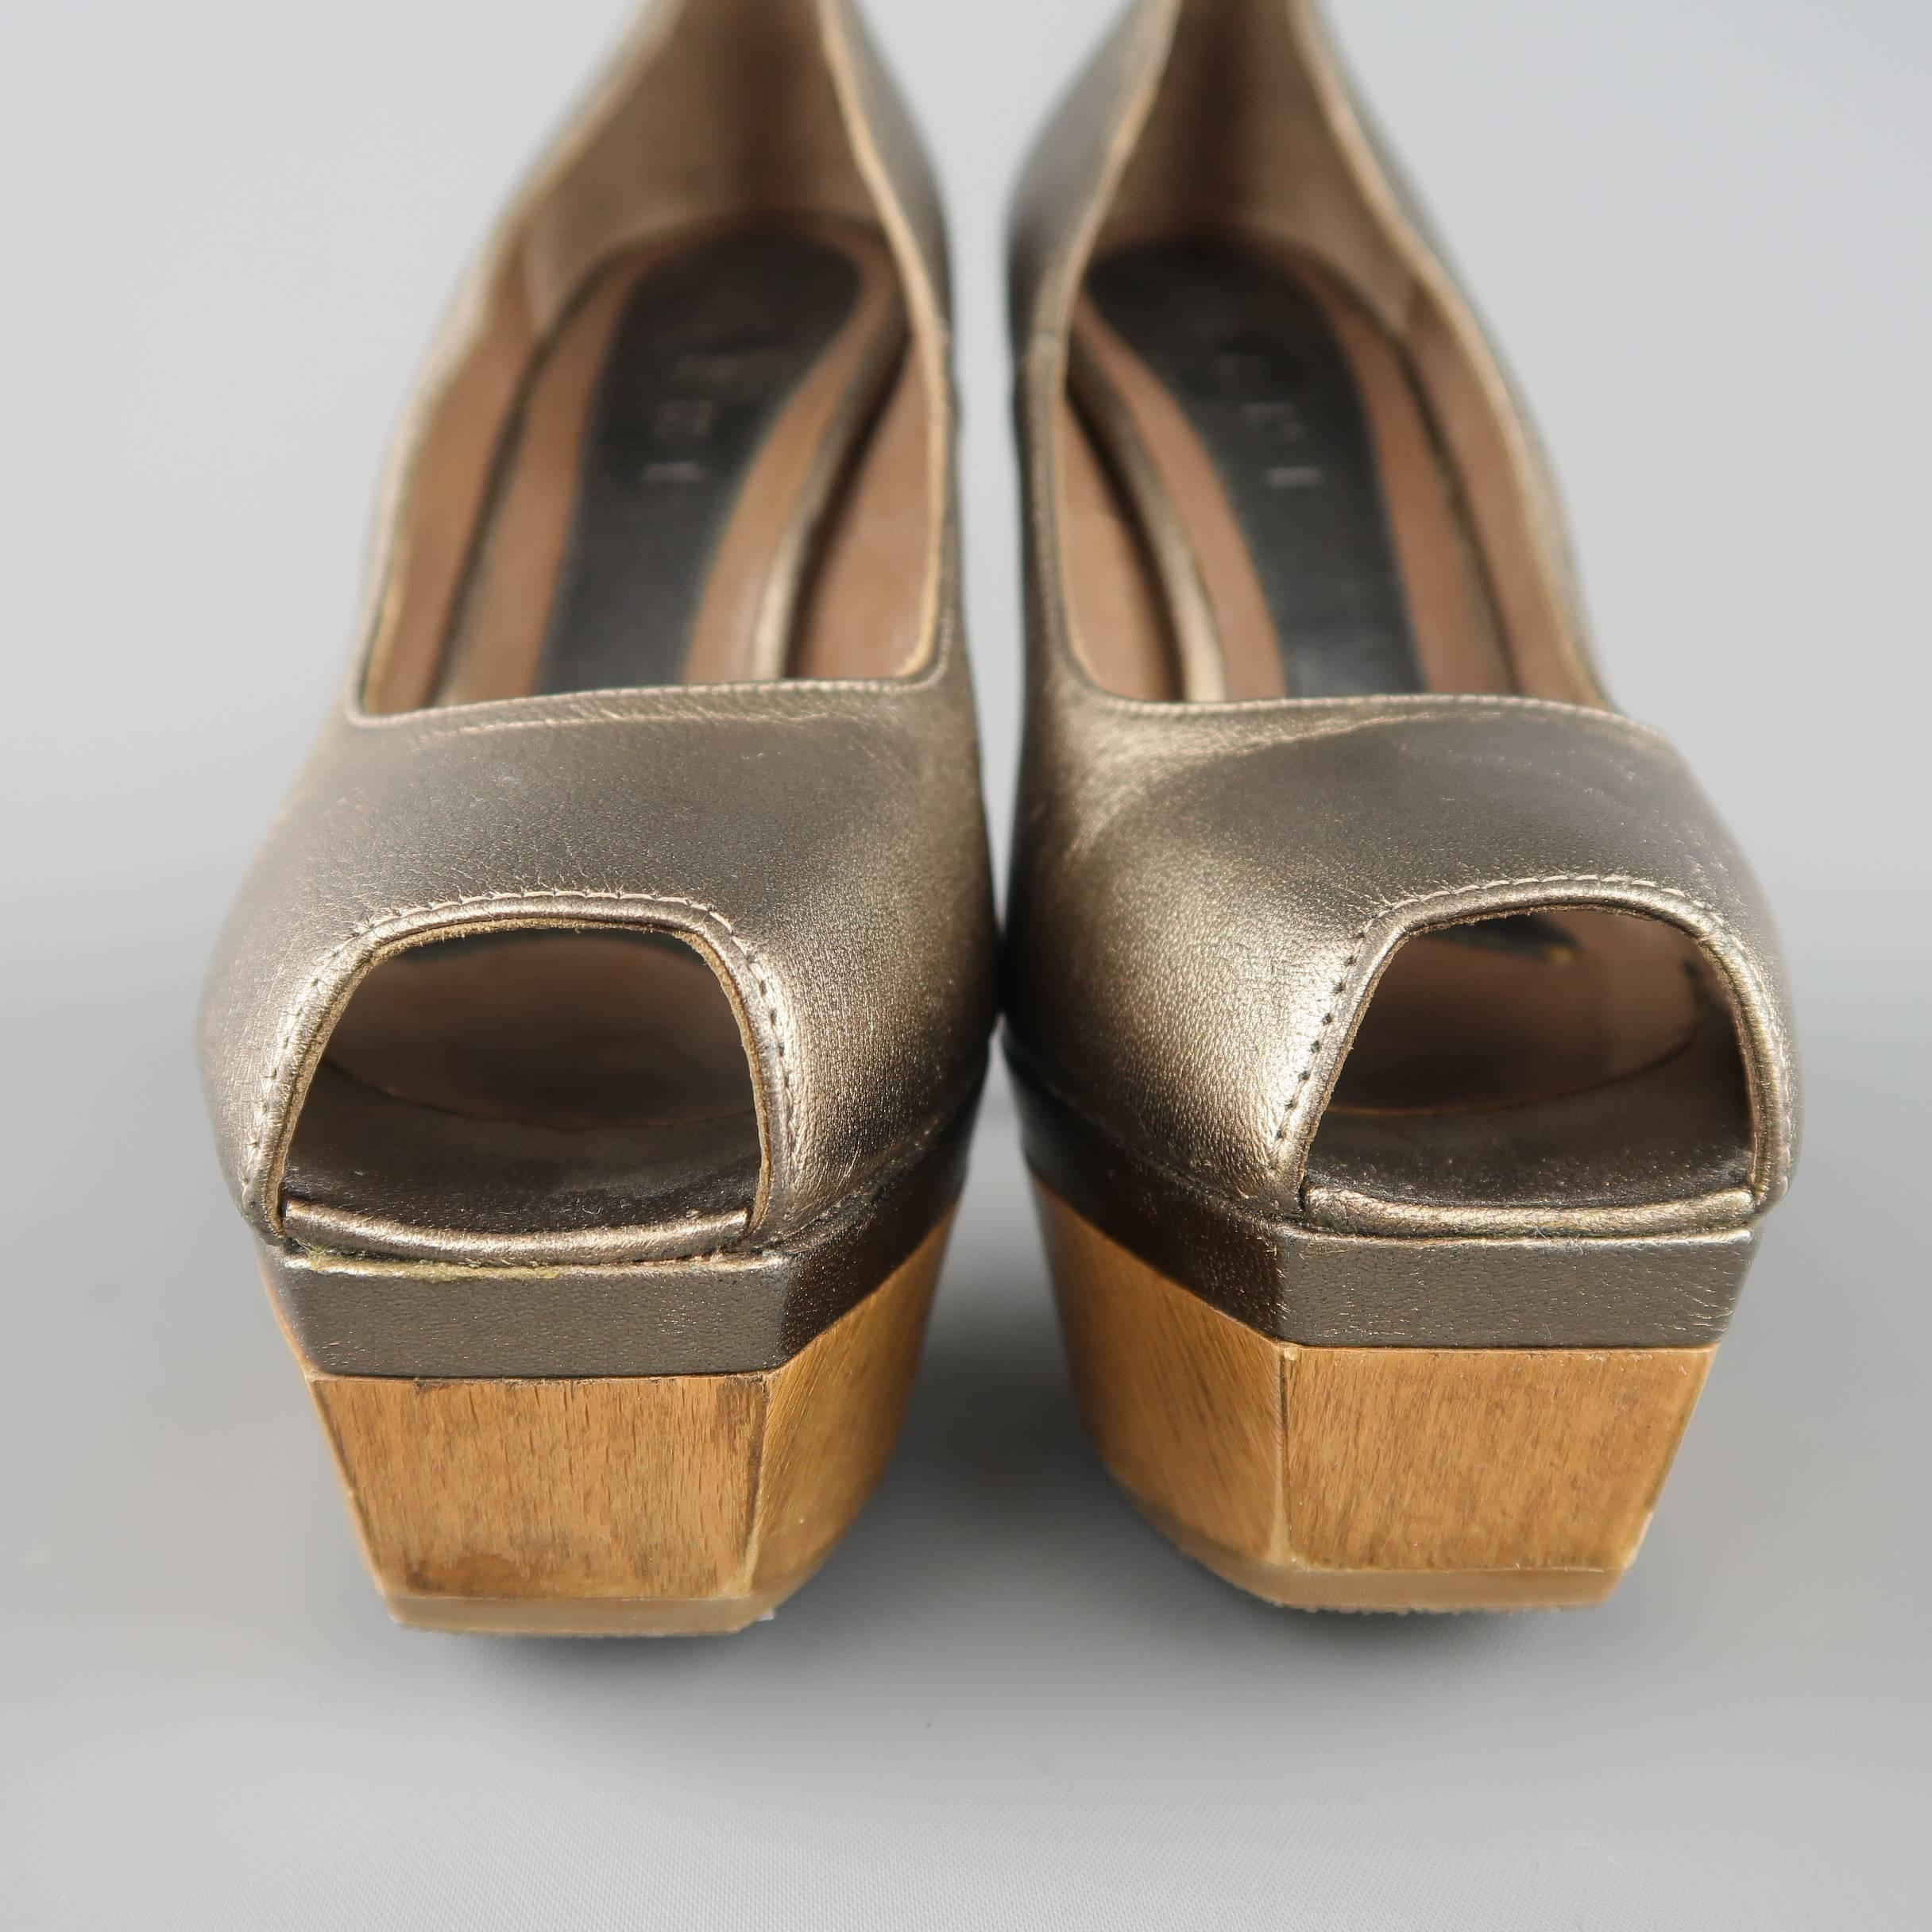 MARNI pumps come in metallic taupe leather with a peep toe and wooden heel and platform.
 
Excellent Pre-Owned Condition.
Marked: IT 35
 
Measurements:
 
Heel: 5 in.
Platform: 1.5 in
